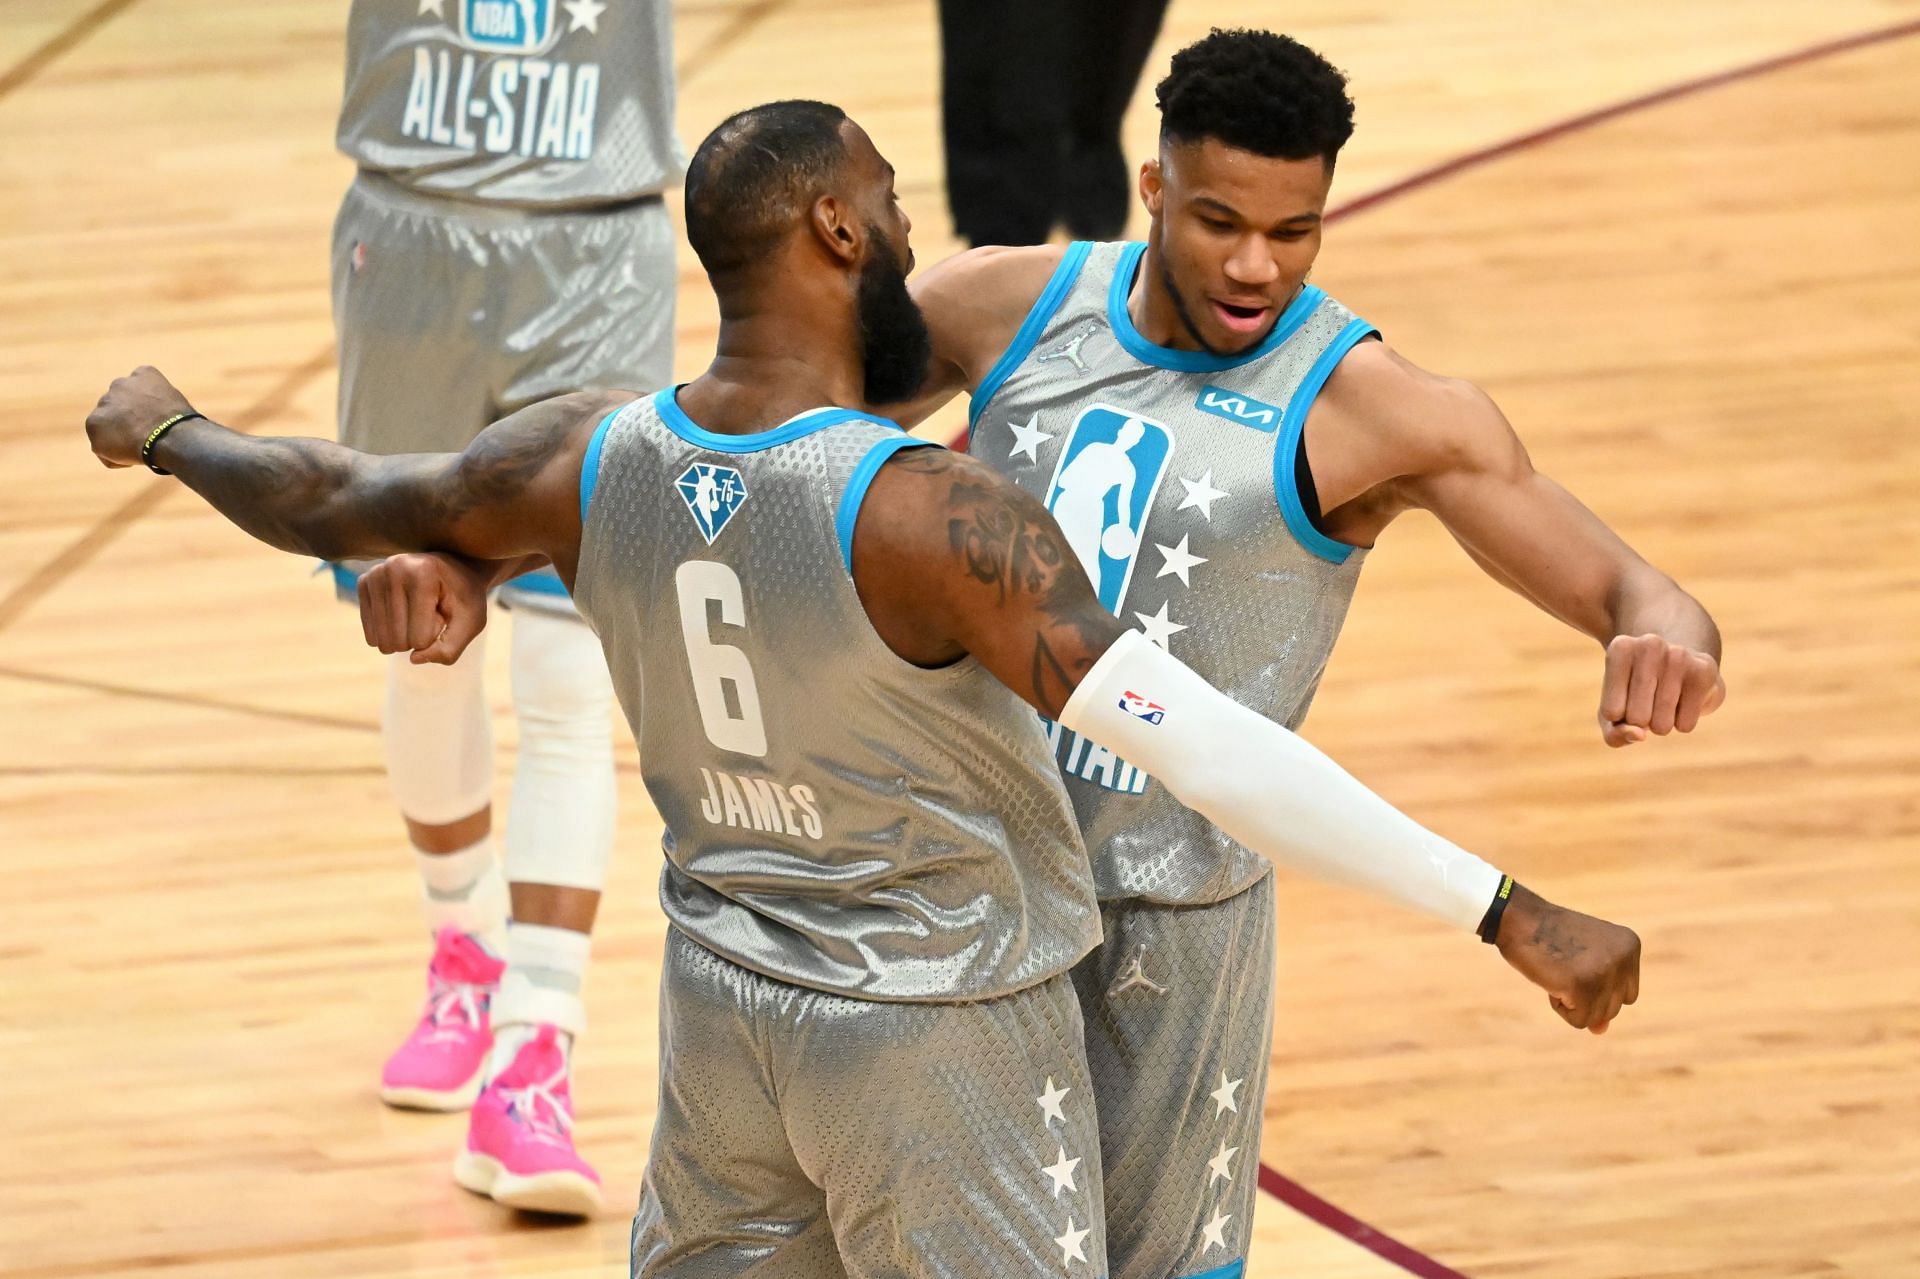 King James celebrating with Giannis Antetokounmpo after hitting the game-winner in the All-Star Game on Sunday in Cleveland, Ohio.